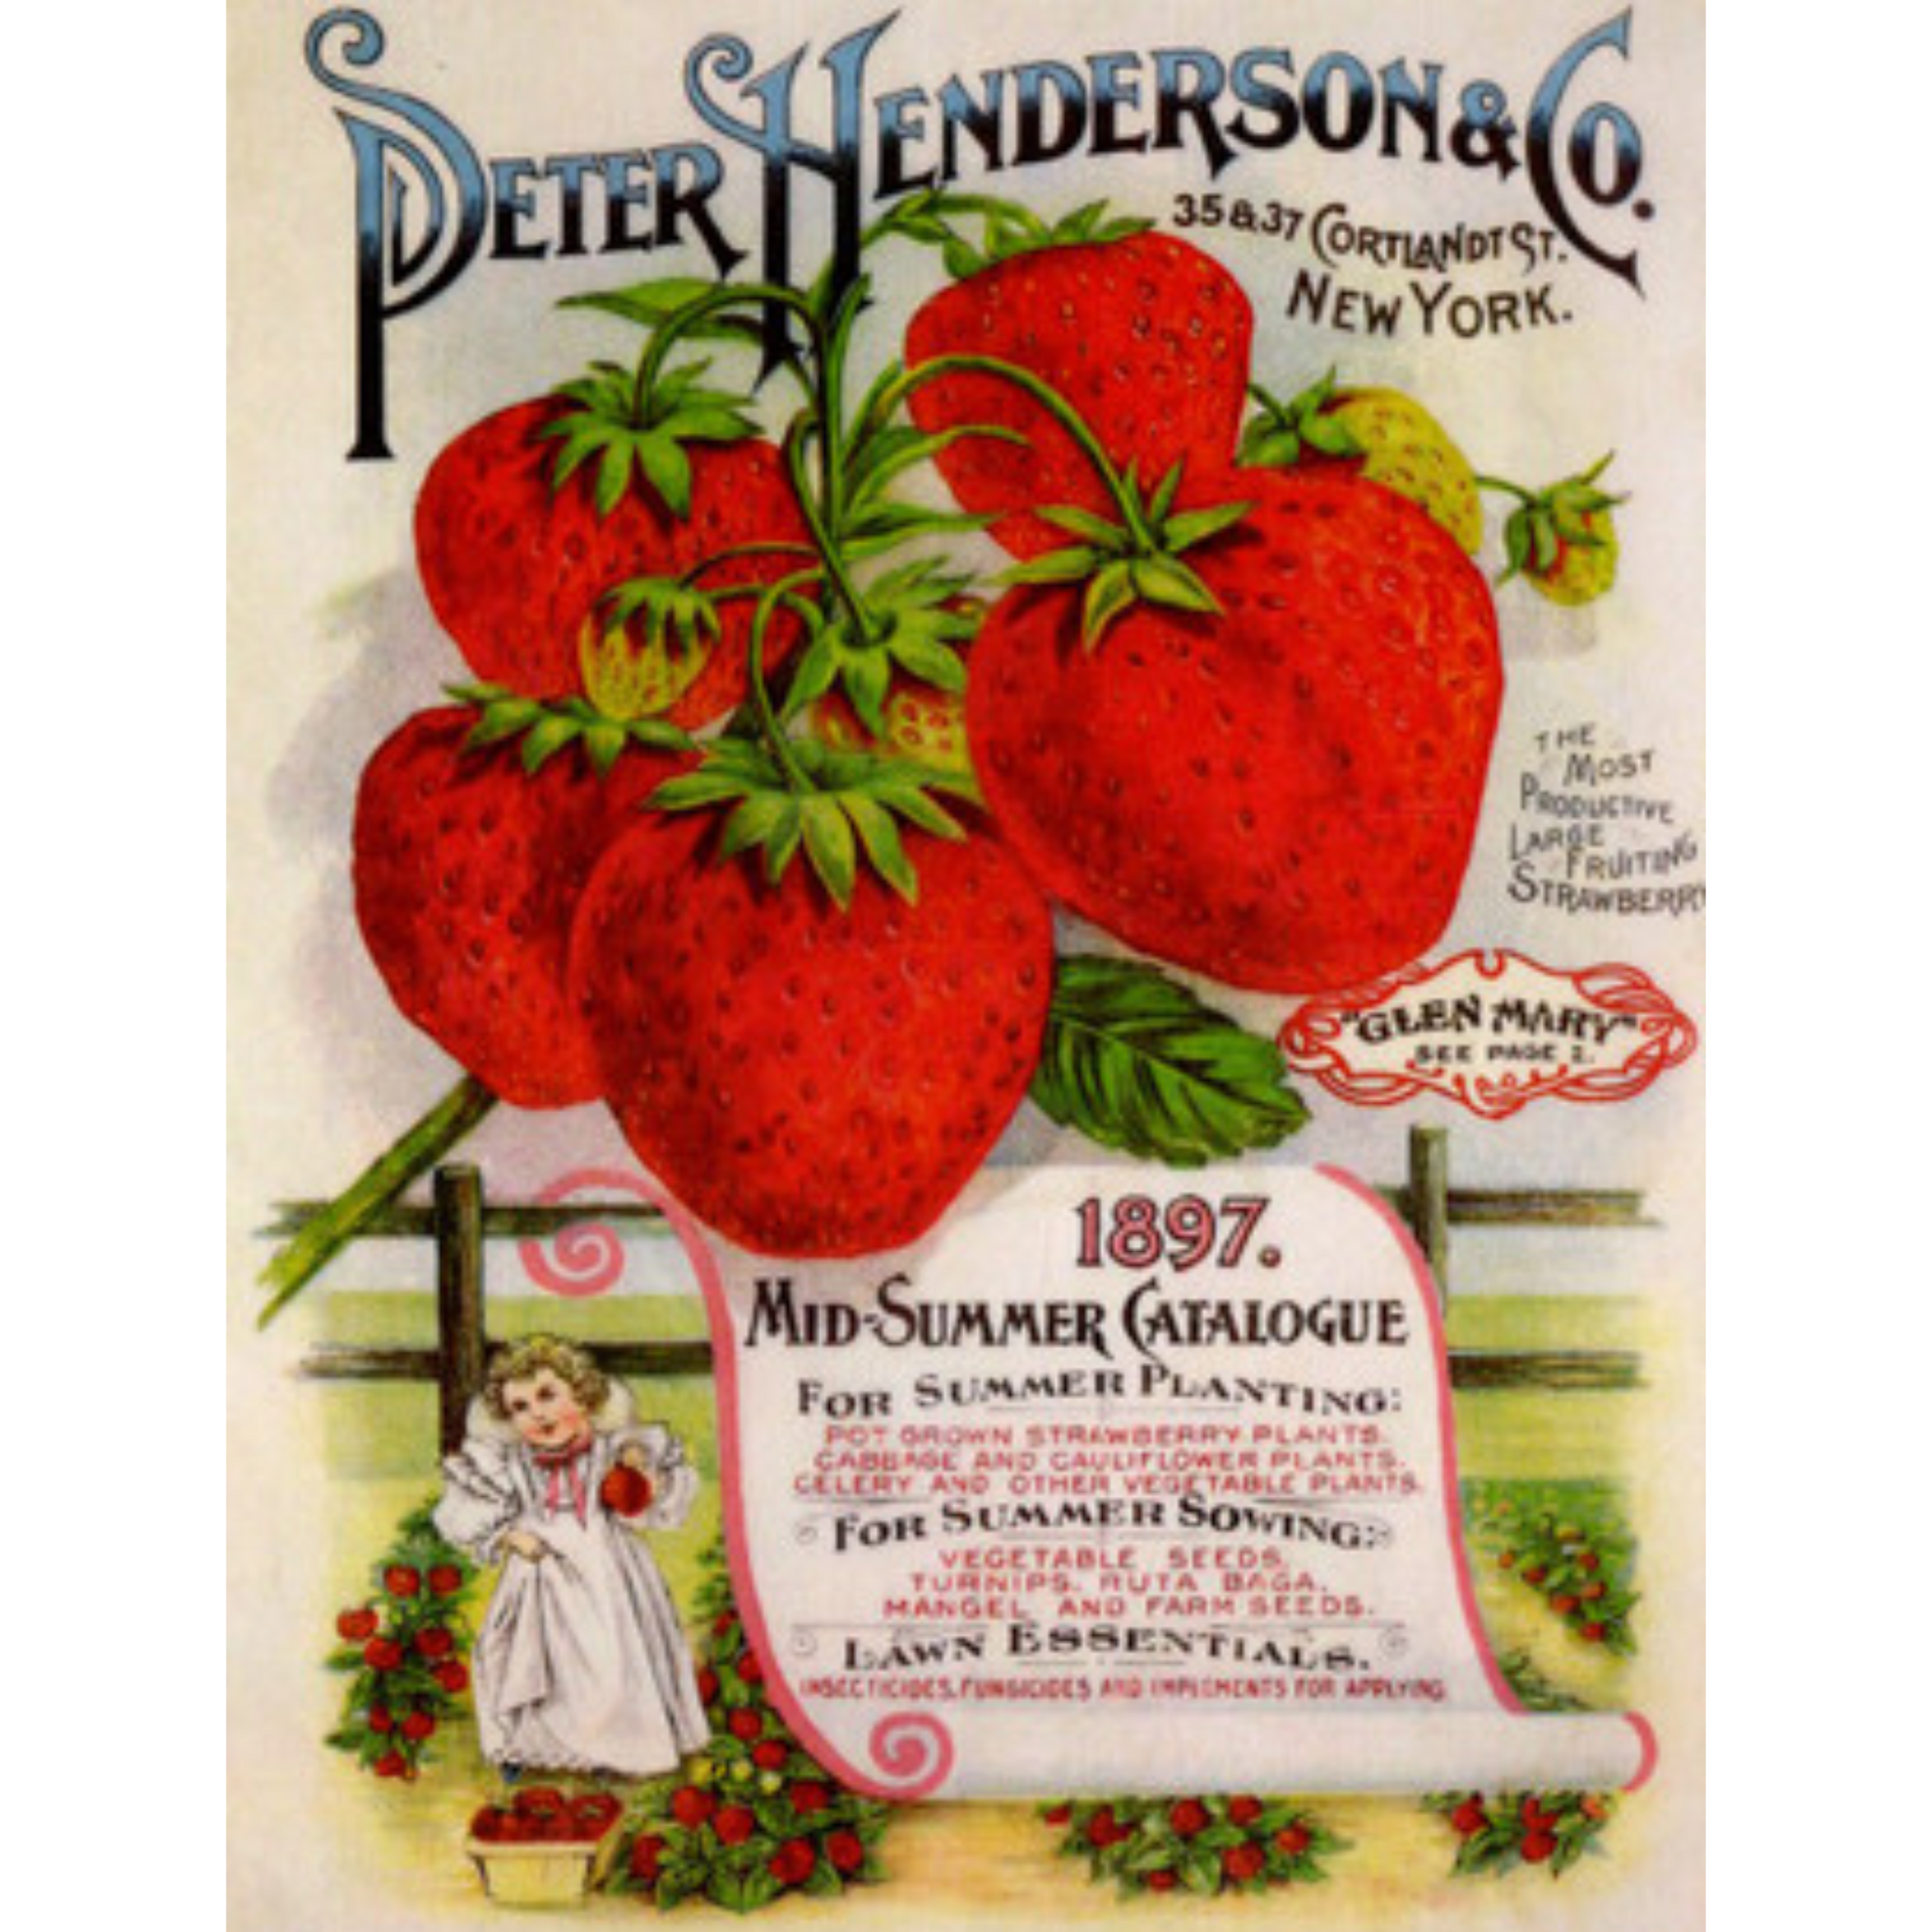 "Peter Henderson Strawberries Mid-Summer Catalogue 1897"  TT62 -  reproduction print on decoupage rice paper by Calambour. Size A4 available at Milton's Daughter.